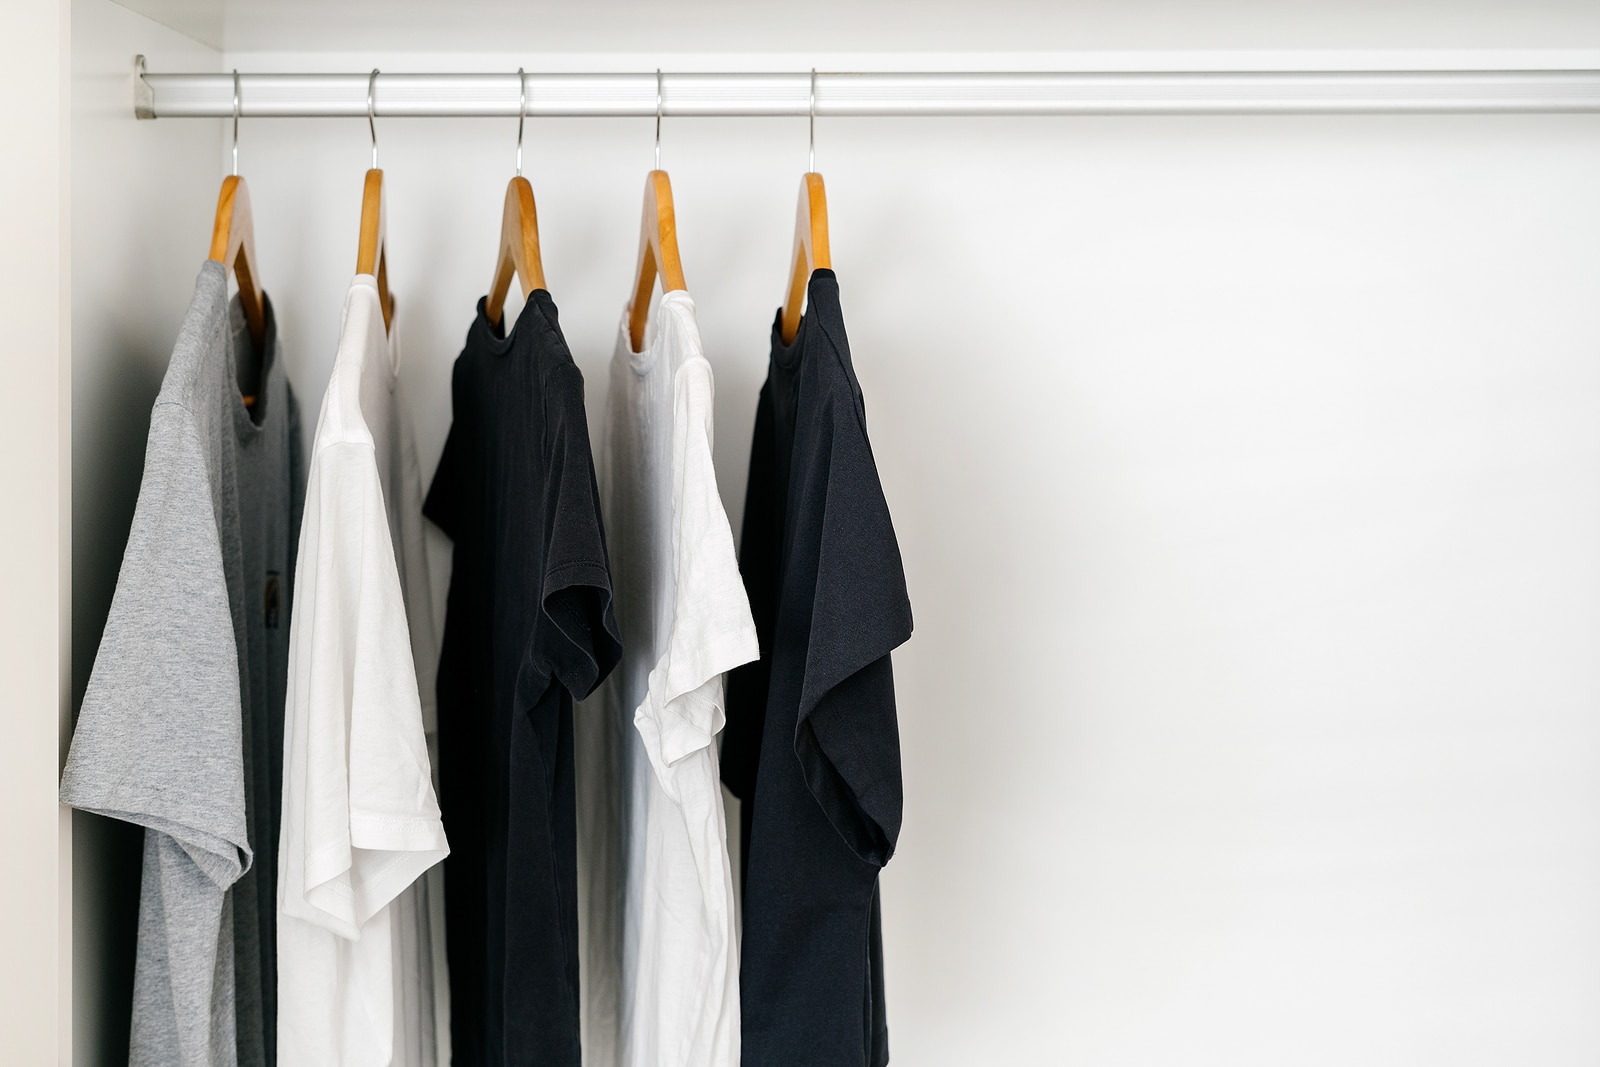 Shirts hanging on wooden hangers in a white closet